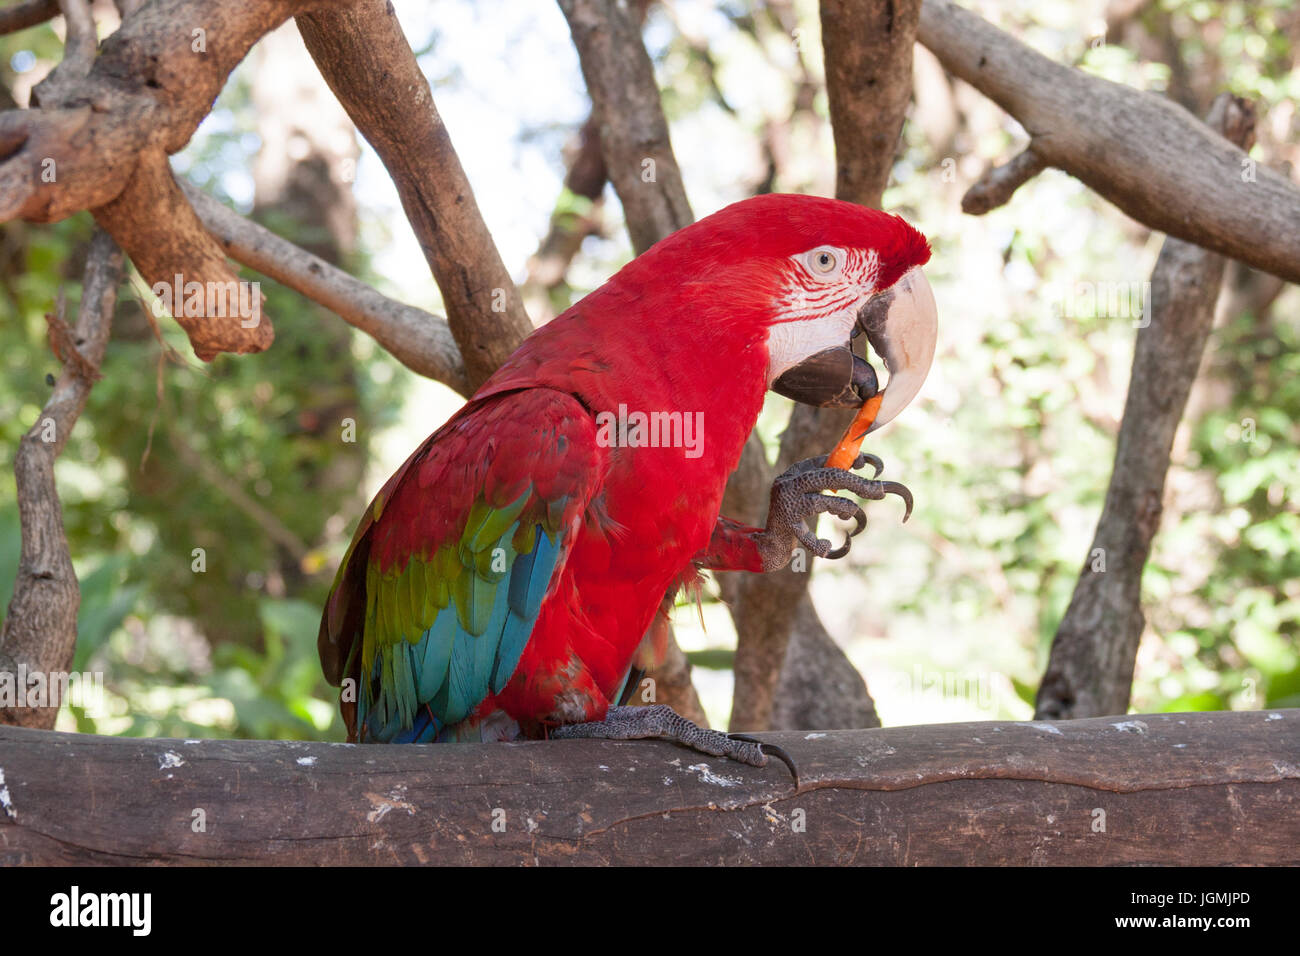 Green-winged macaw (Ara chloropterus), aka red-and-green macaw eating carrot, holding it with one claw, perched on branch at Zoo of Asuncion, Paraguay Stock Photo